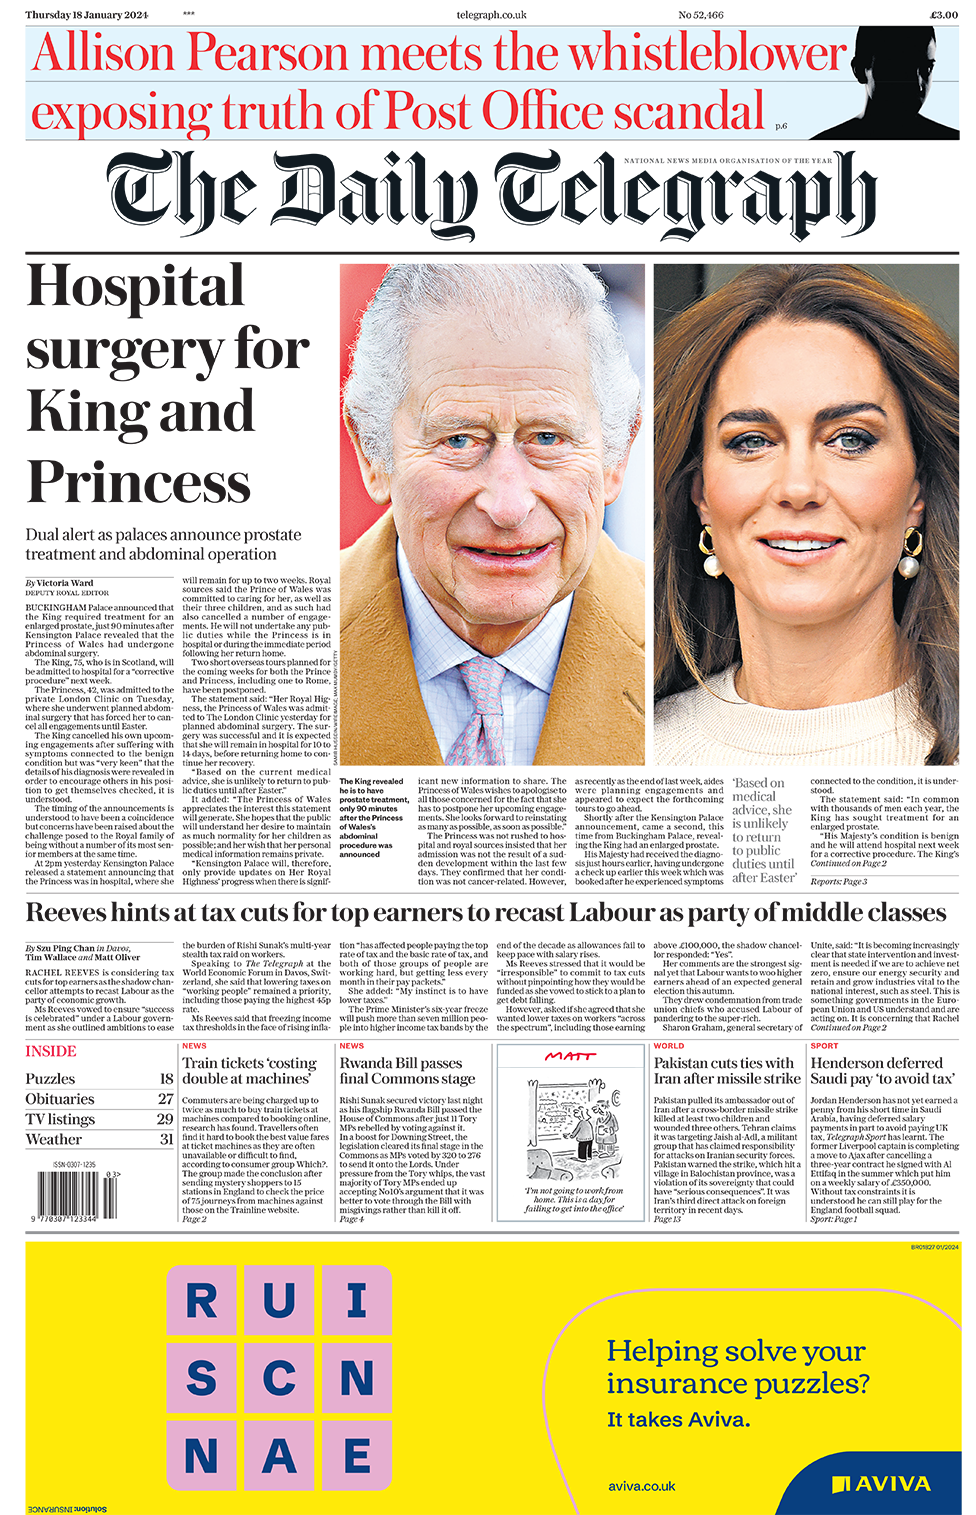 The headline in the Telegraph reads: "Hospital surgery for King and Princess".